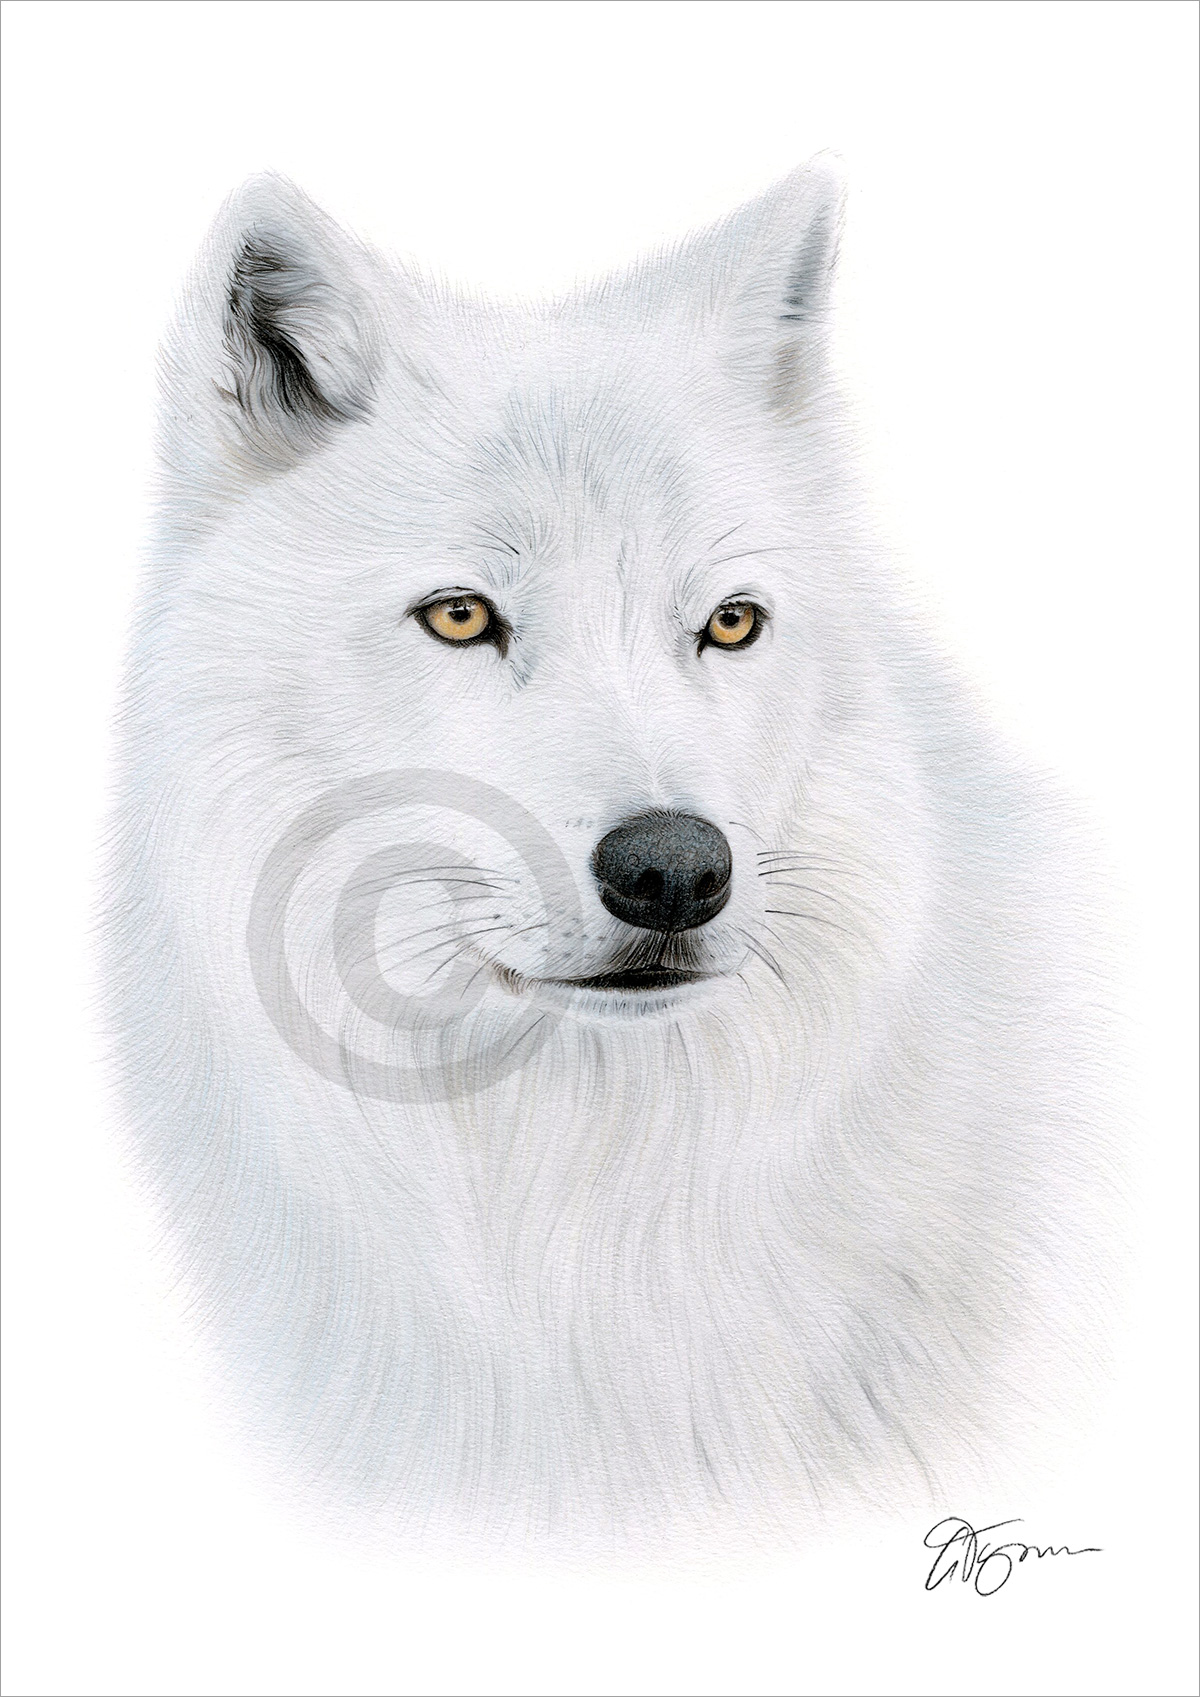 Colour pencil drawing of an arctic wolf by artist Gary Tymon